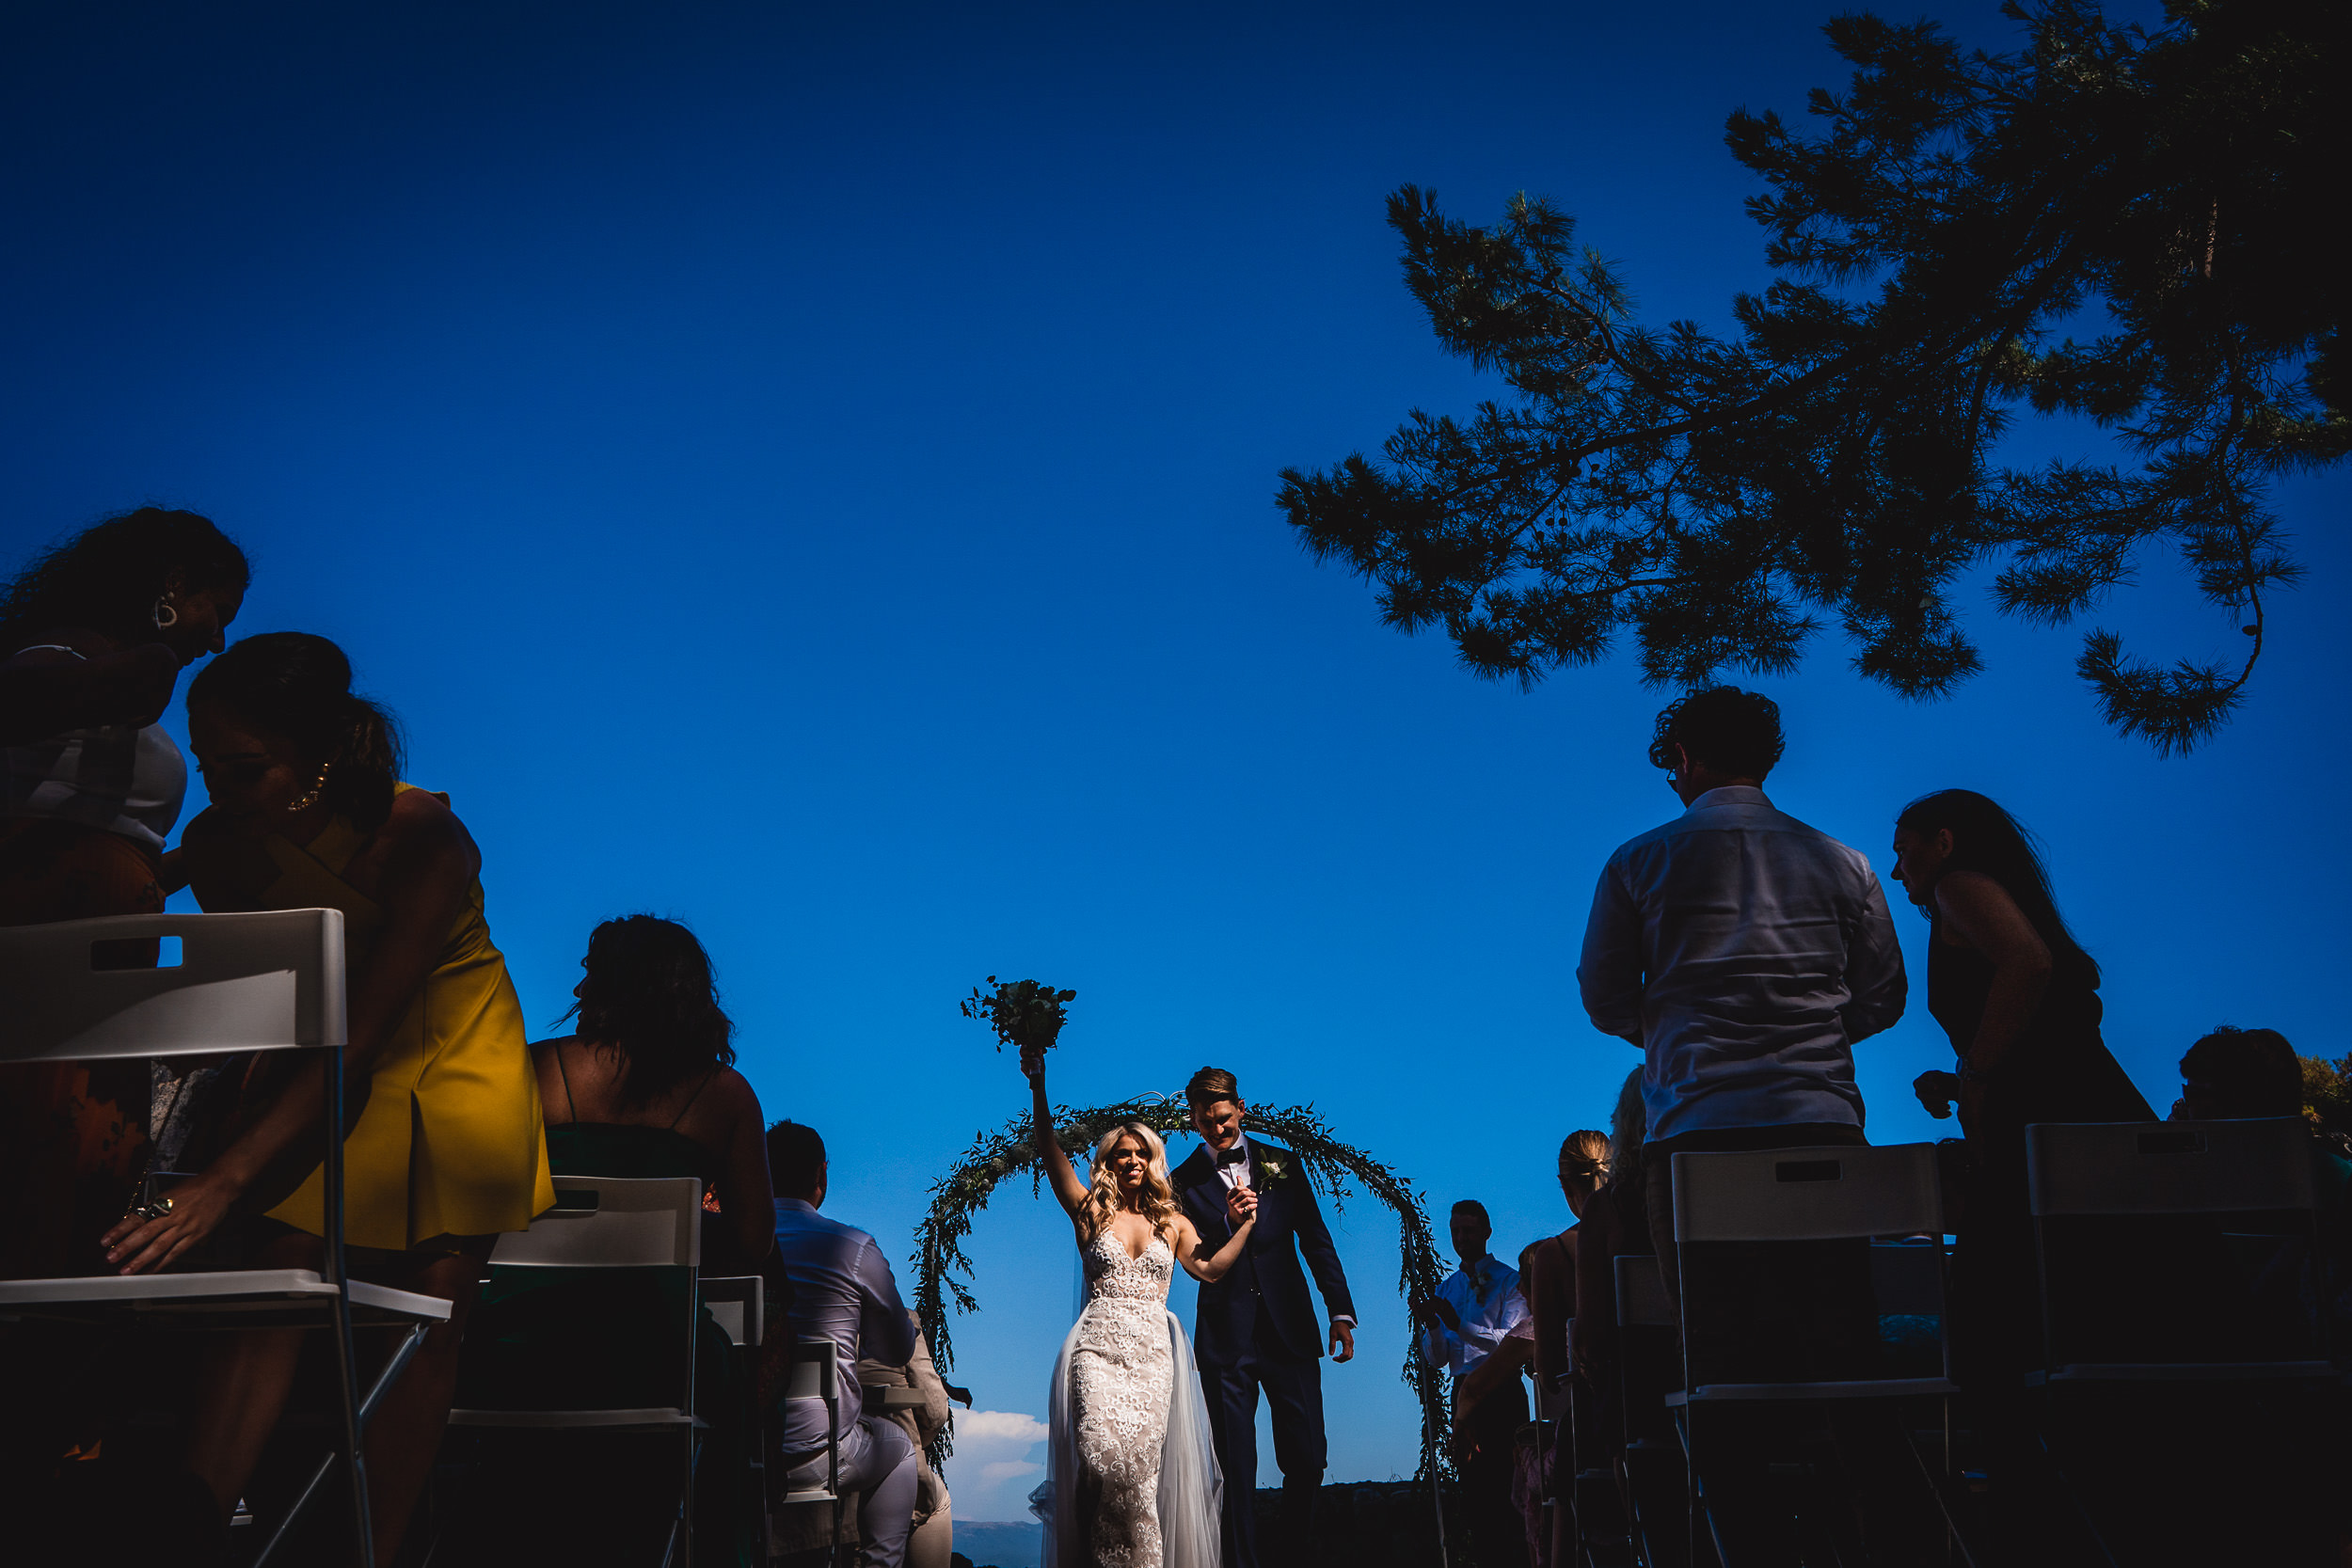 A wedding ceremony with the bride and groom under the blue sky.